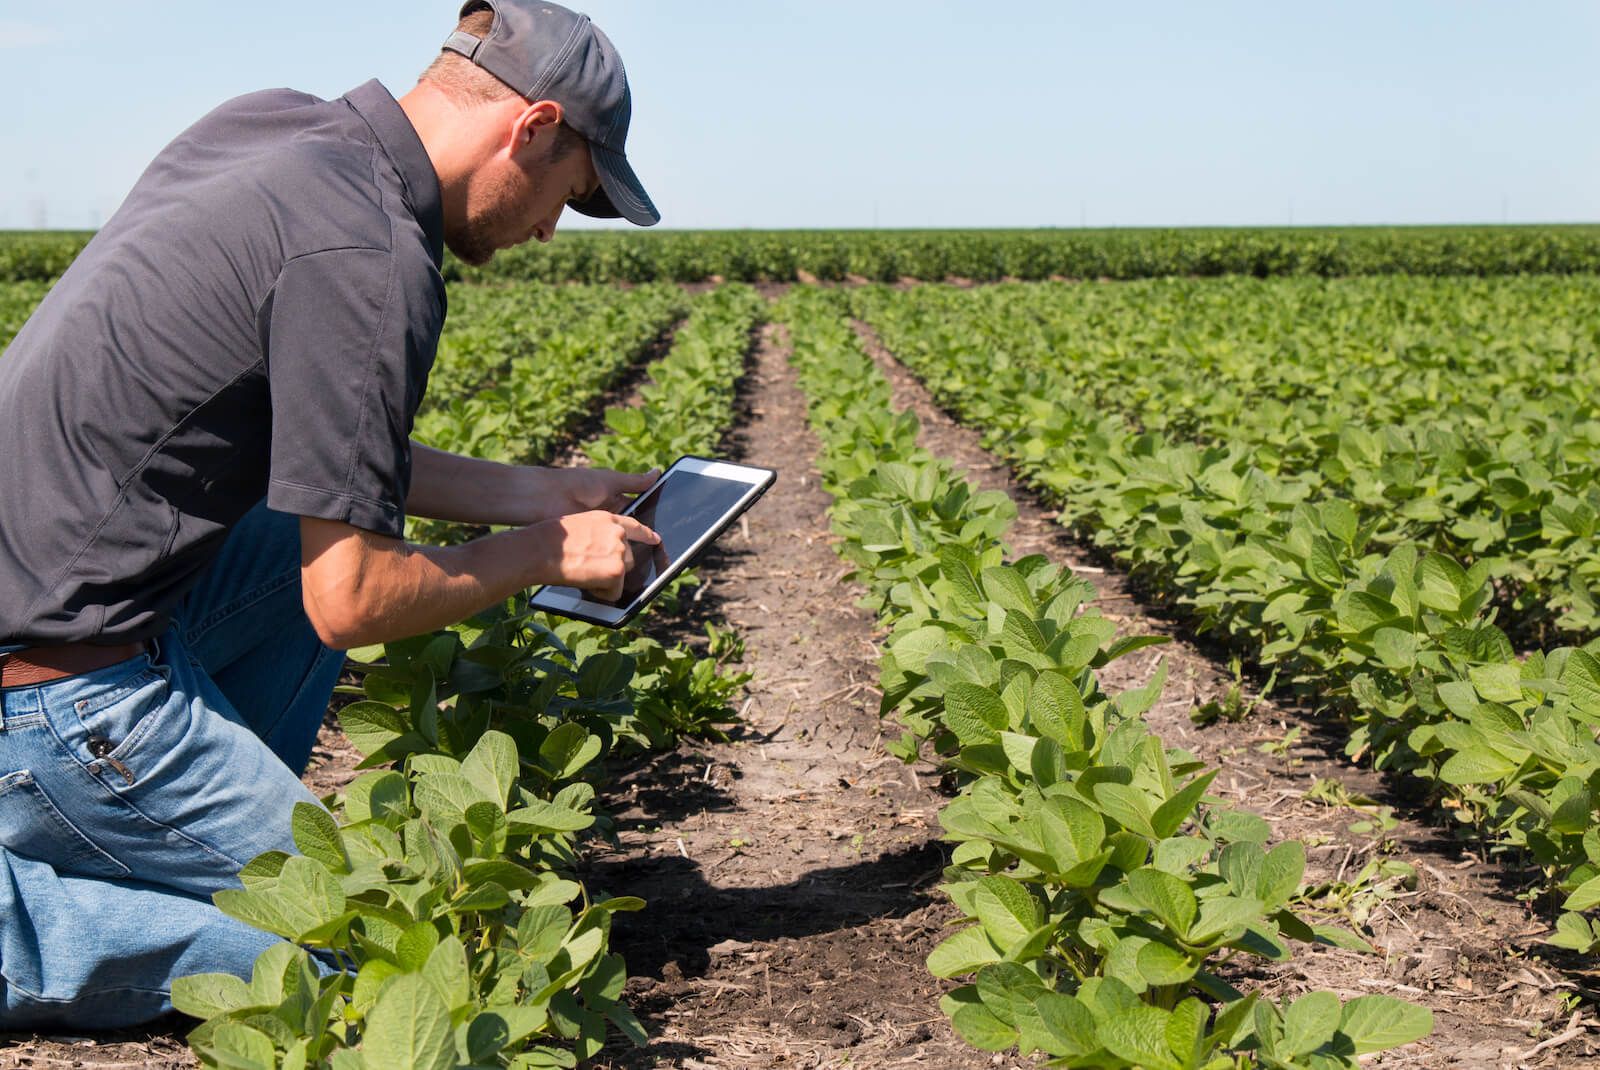 An agronomist kneeling in a field using a tablet.